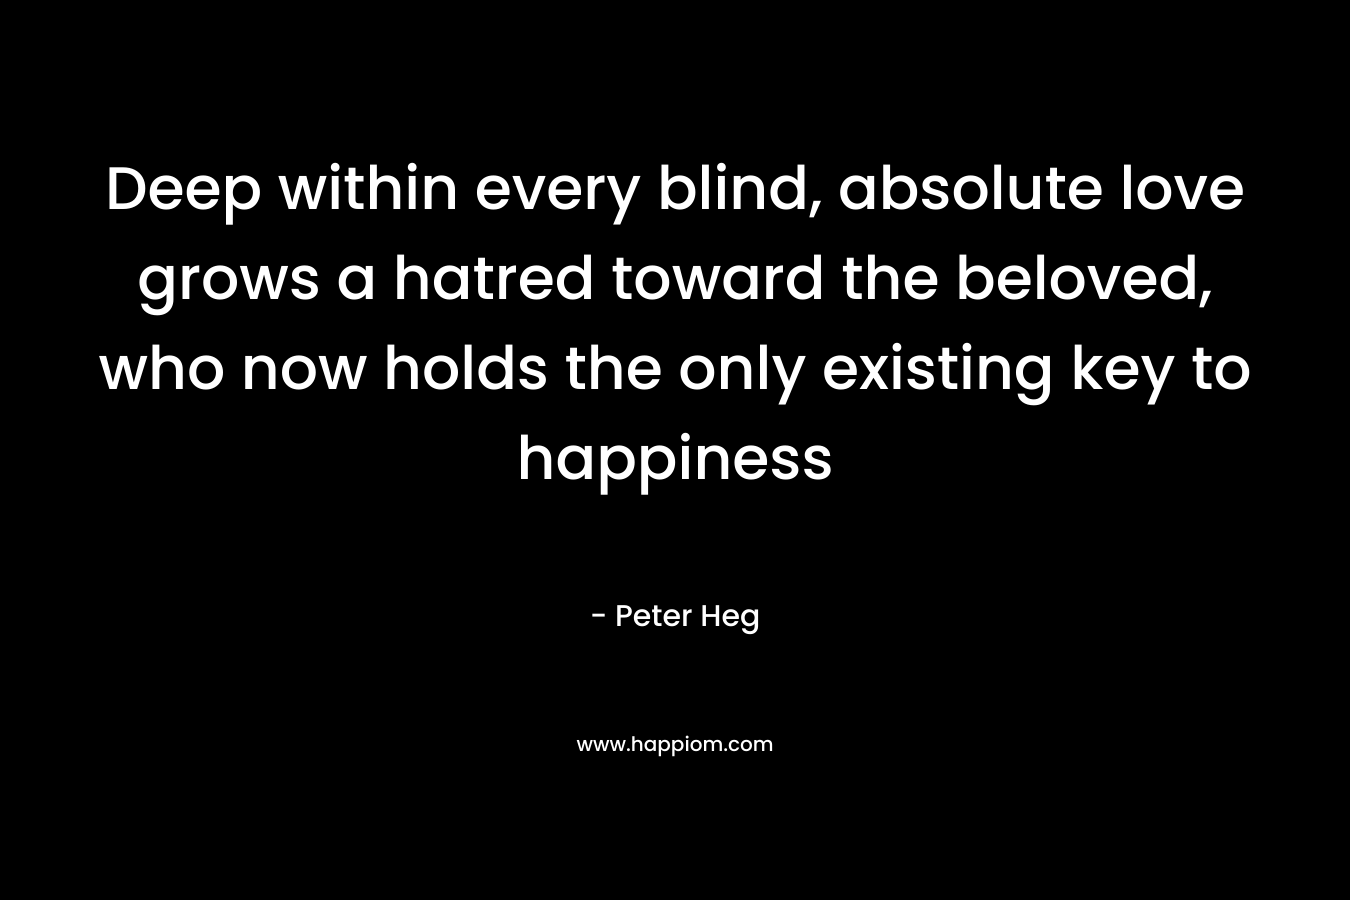 Deep within every blind, absolute love grows a hatred toward the beloved, who now holds the only existing key to happiness – Peter Heg